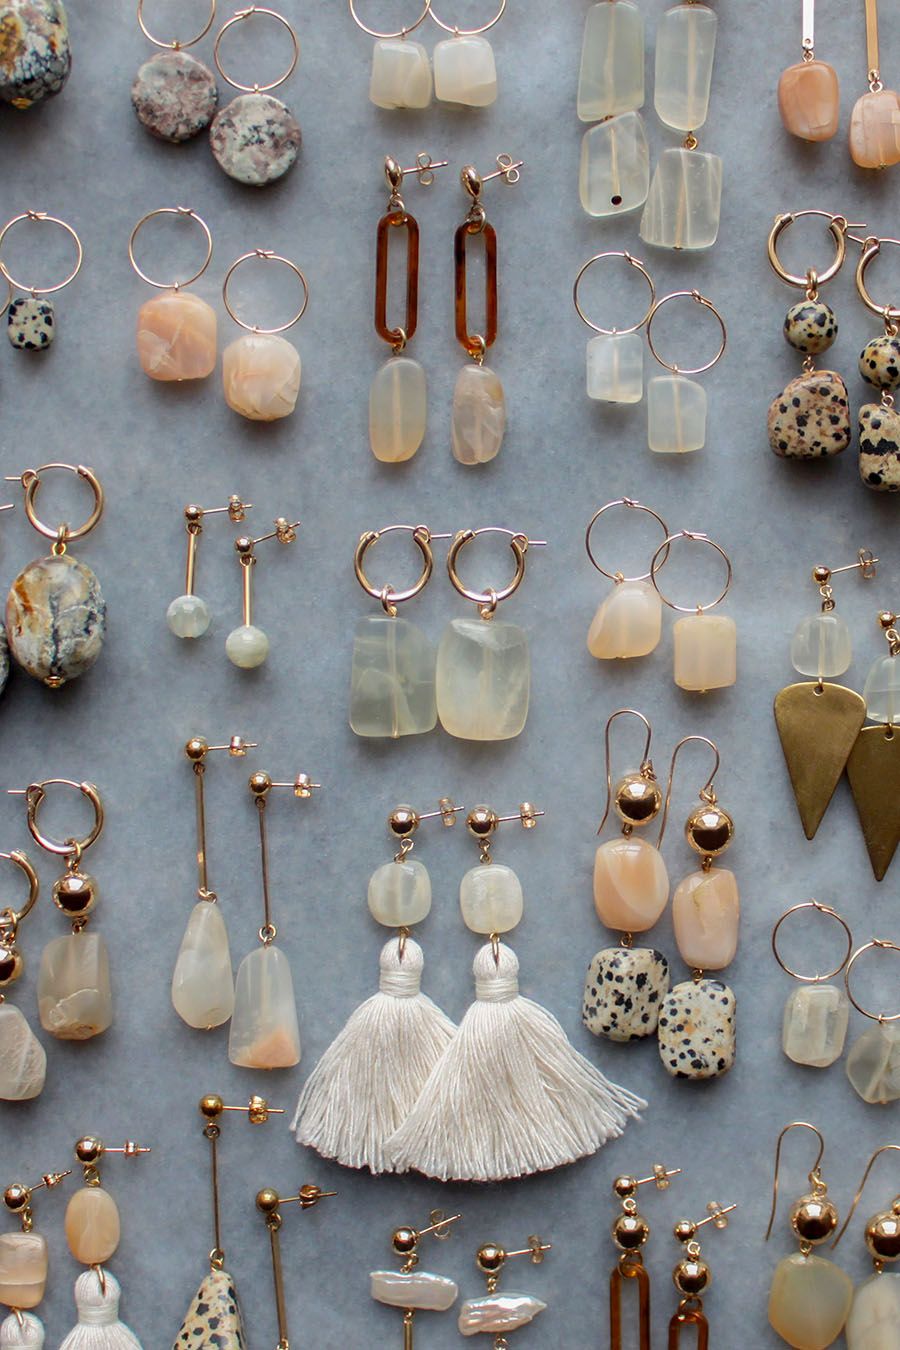 Keep calm and accessorize with handmade earrings